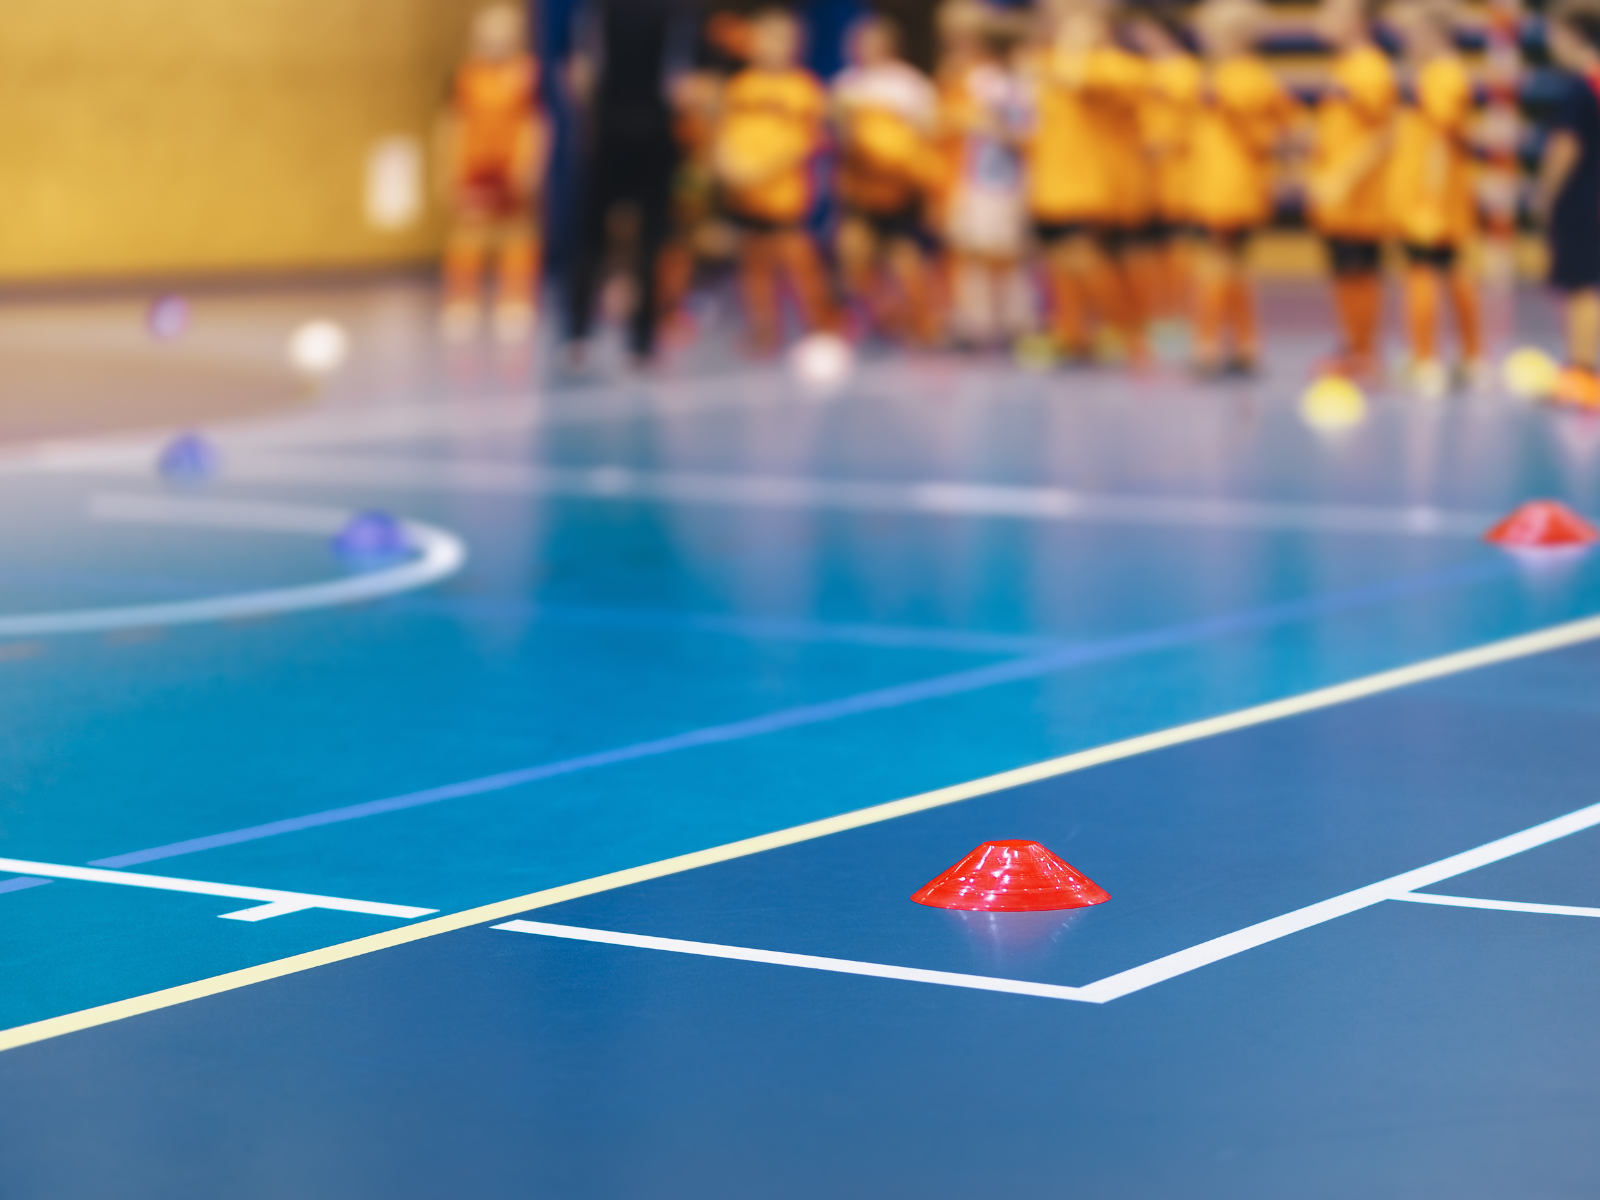 Sports hall with red cones on the floor